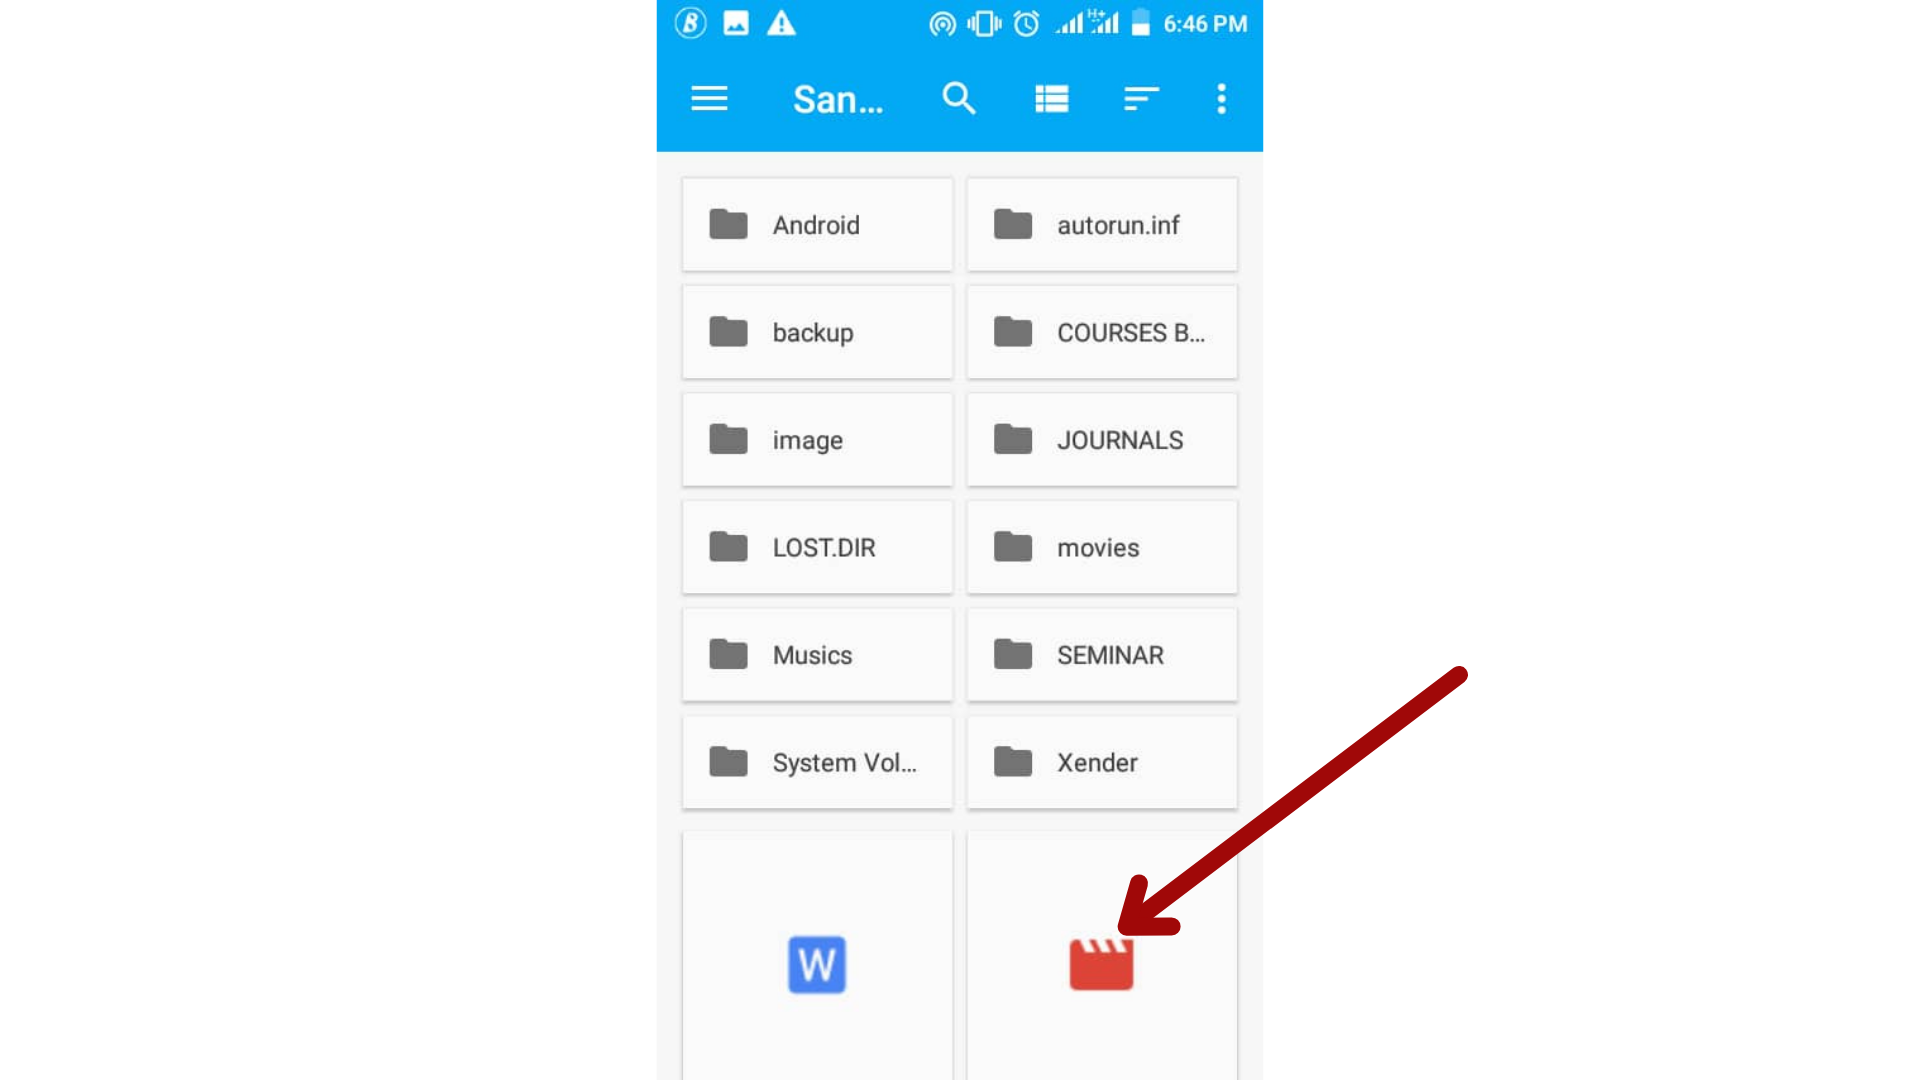 Share videos as Document on Whatsapp Android